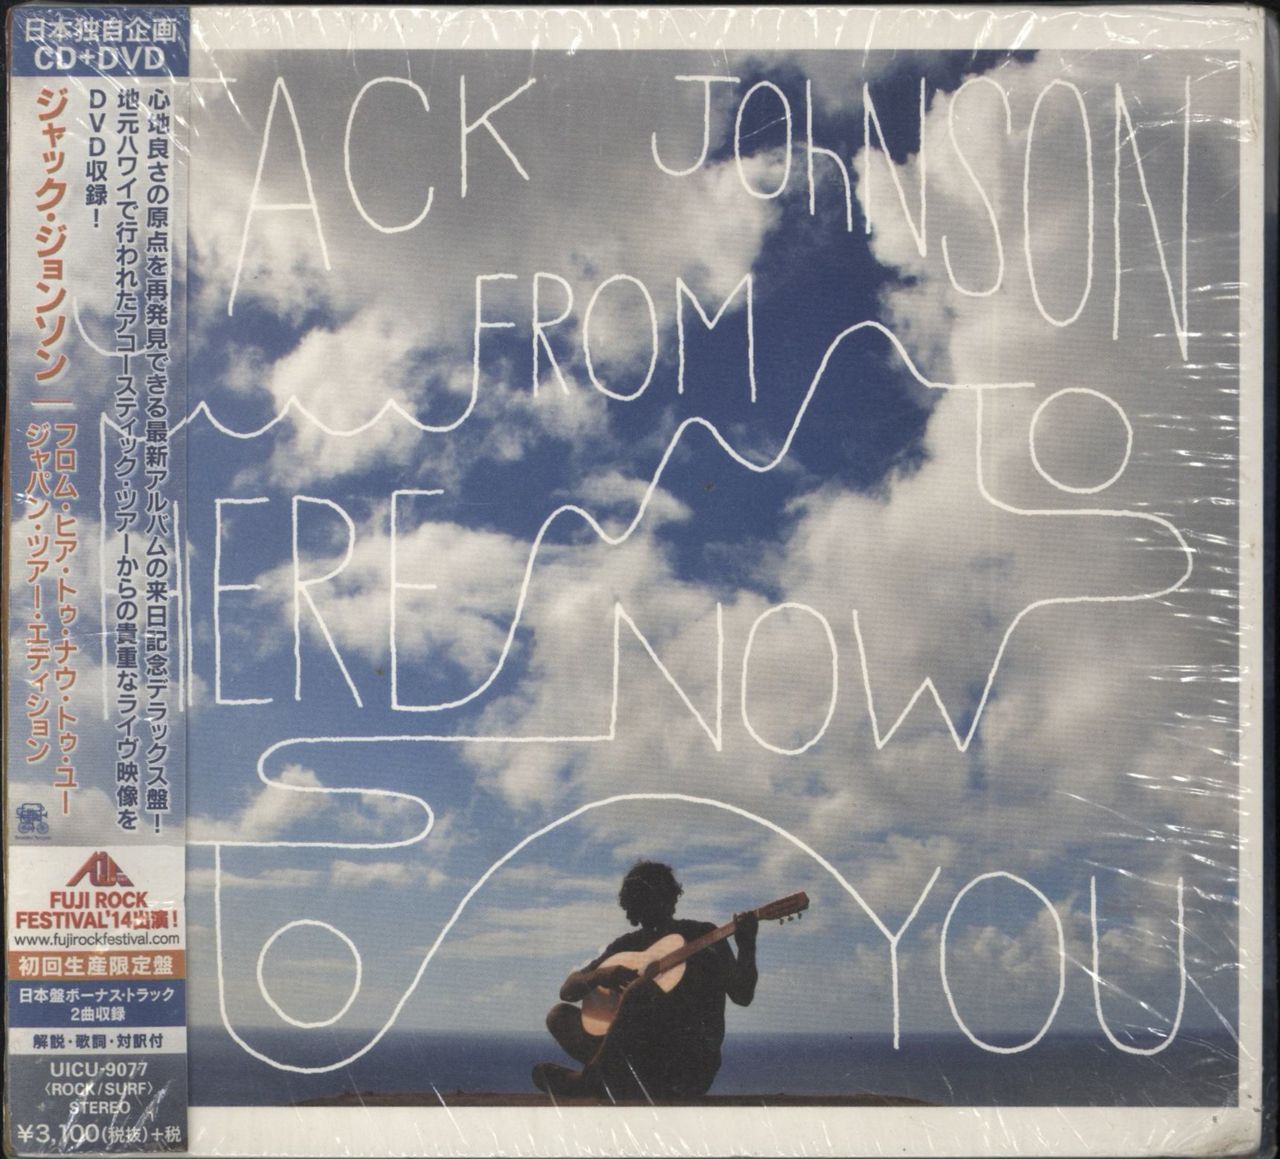 Jack Johnson From Here To Now To You - Sealed Japanese Promo 2